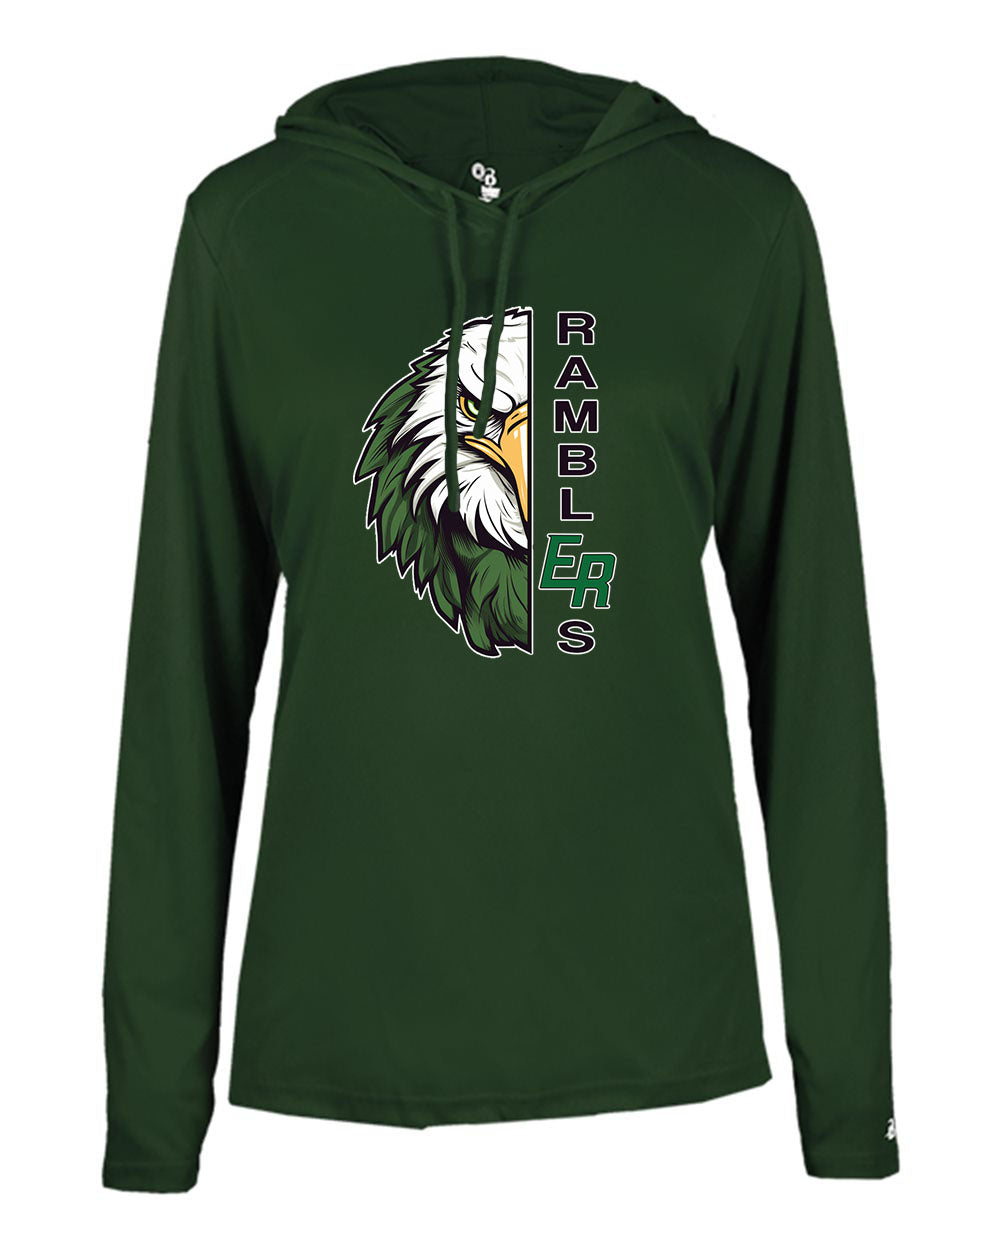 Ramblers Women’s B-Core Long Sleeve Hoodie T-Shirt "Eagle" - 4165 (color options available)